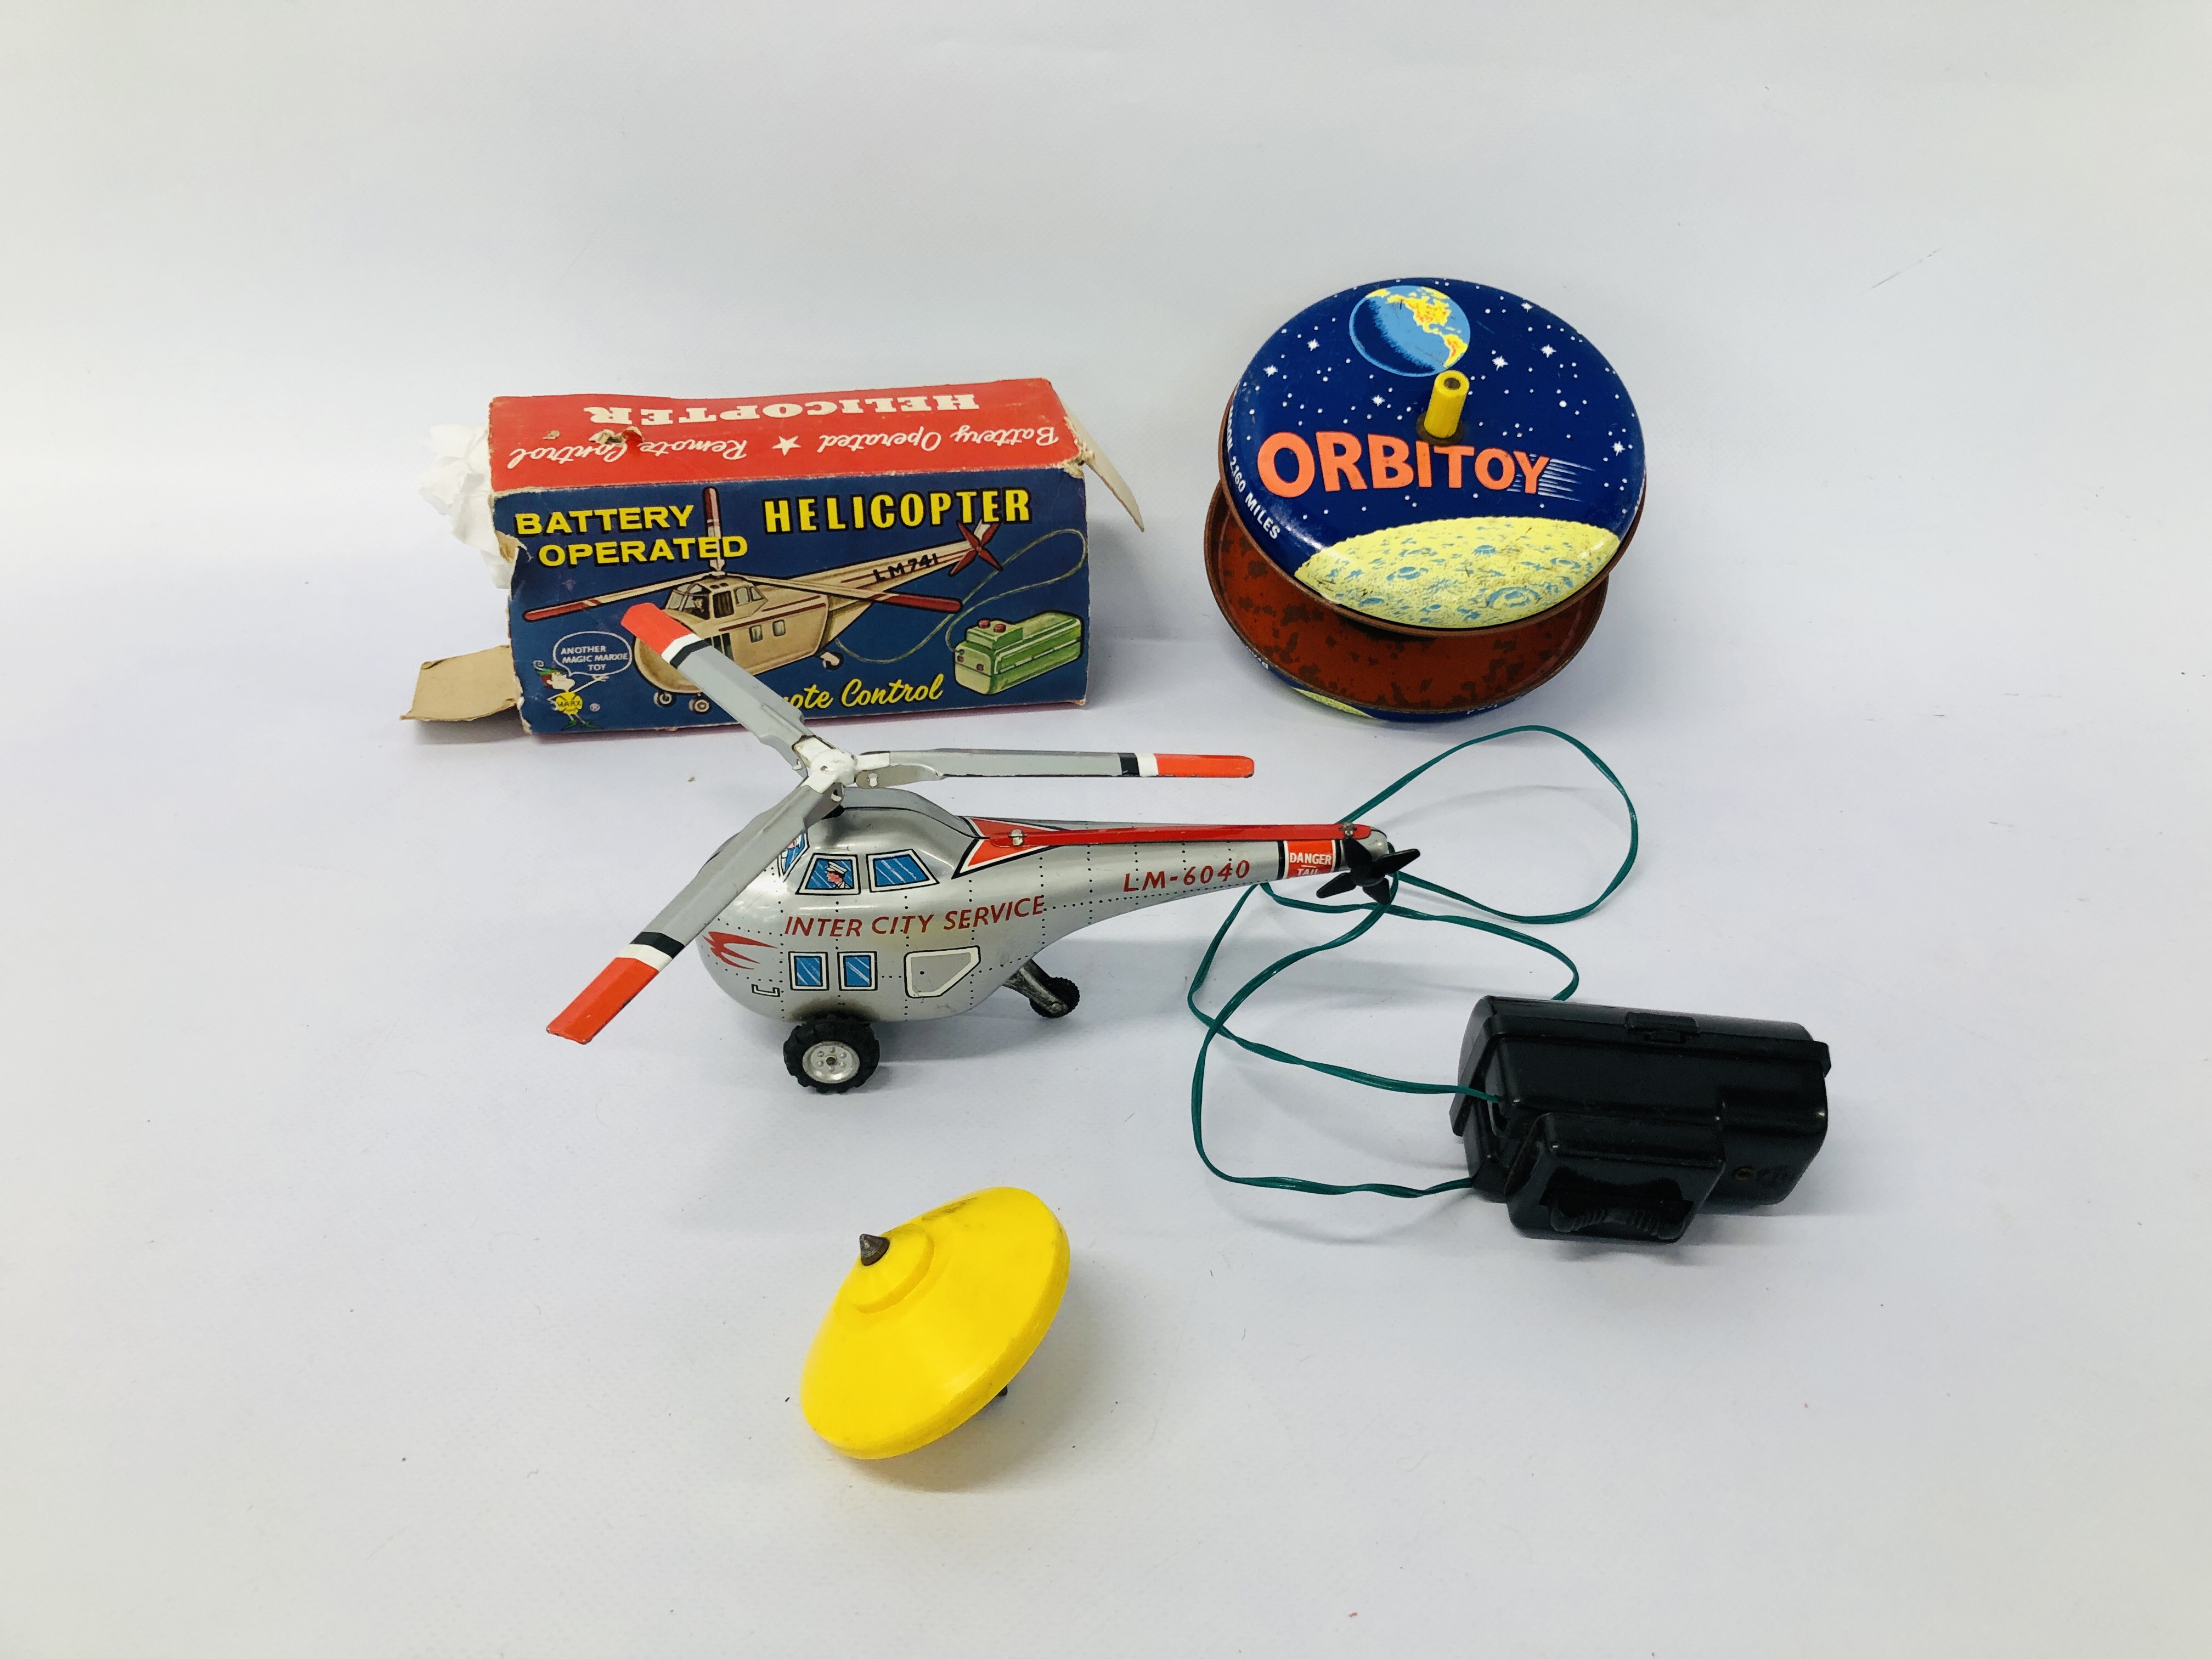 A VINTAGE GREEN MONK COMBEX ORBITOY PAT NO 11468/69 + BATTERY OPERATED HELICOPTER REMOTE CONTROL